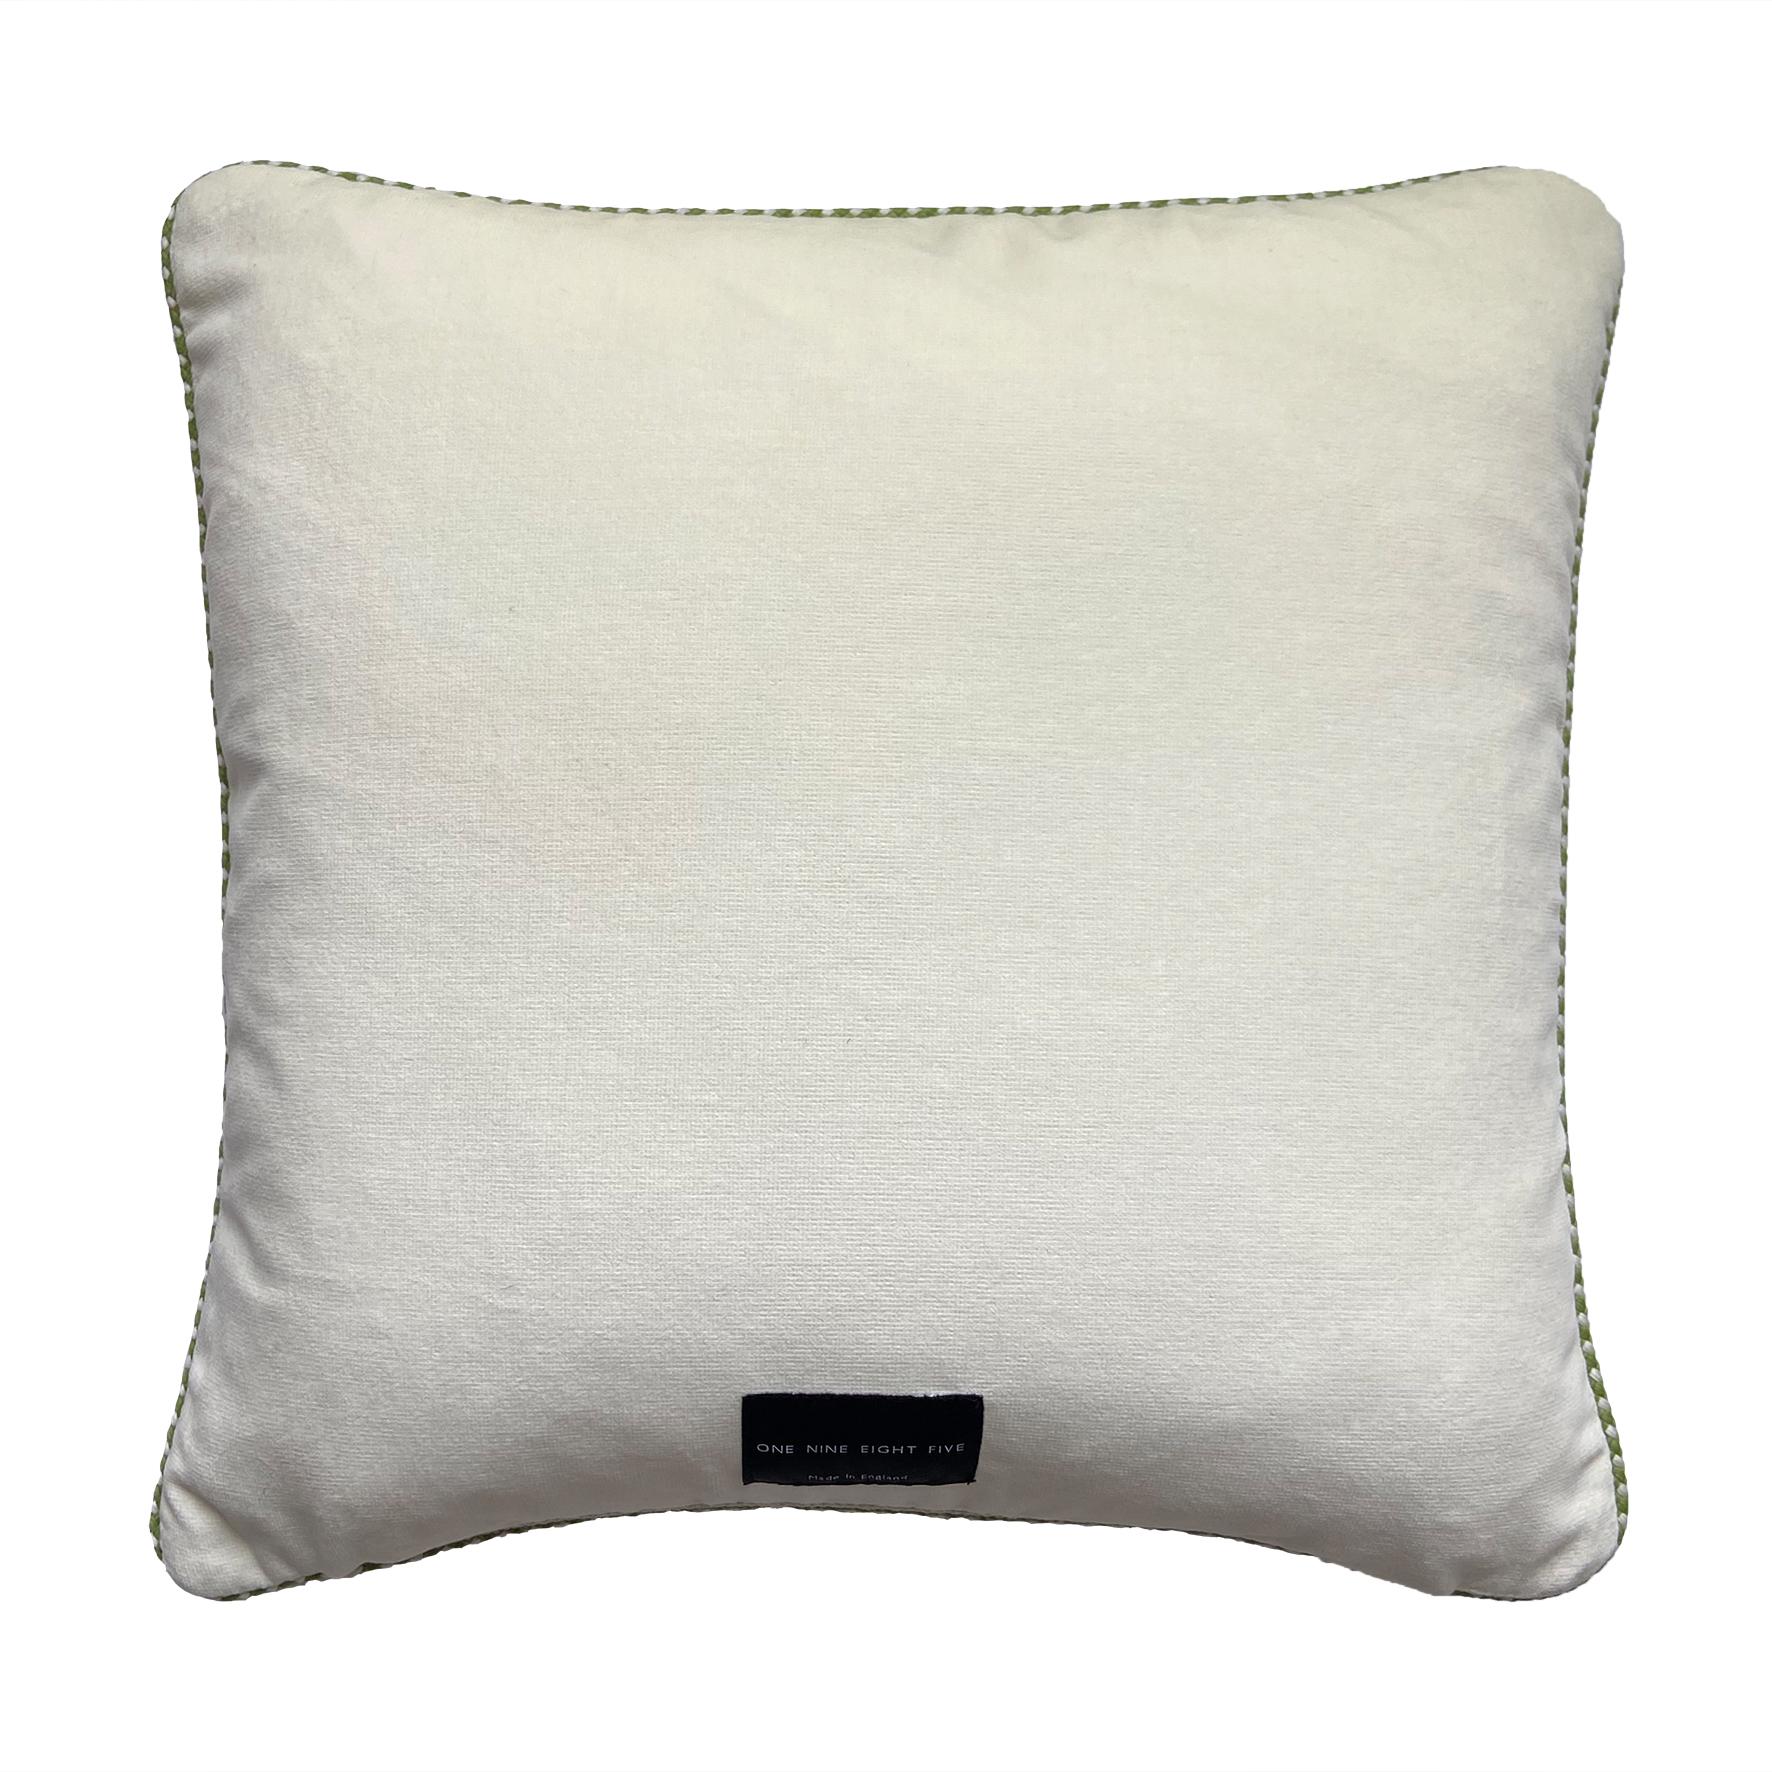 Cora White Kuba Linen Piped Cushion In New Condition For Sale In London, GB